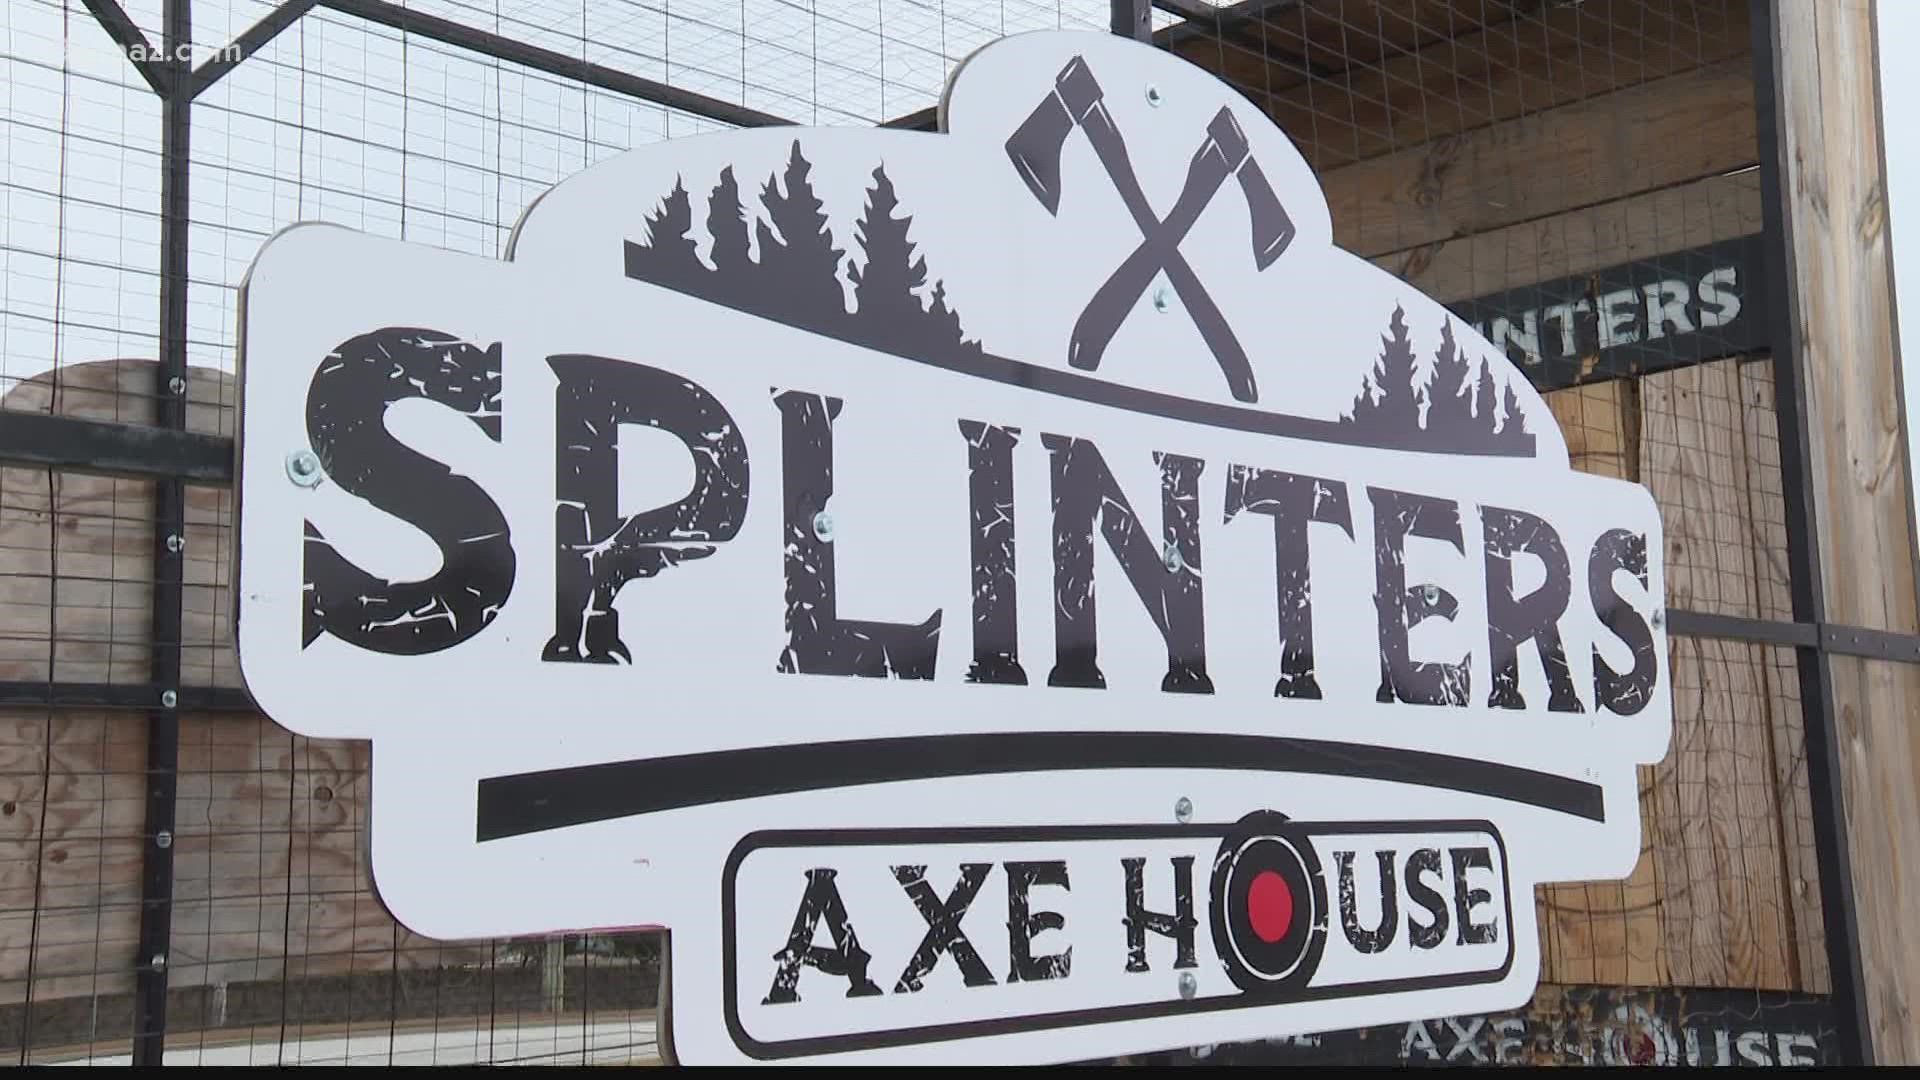 Splinters axe house in warner robins opened this evening to give folks something to do after putting up the leftovers.